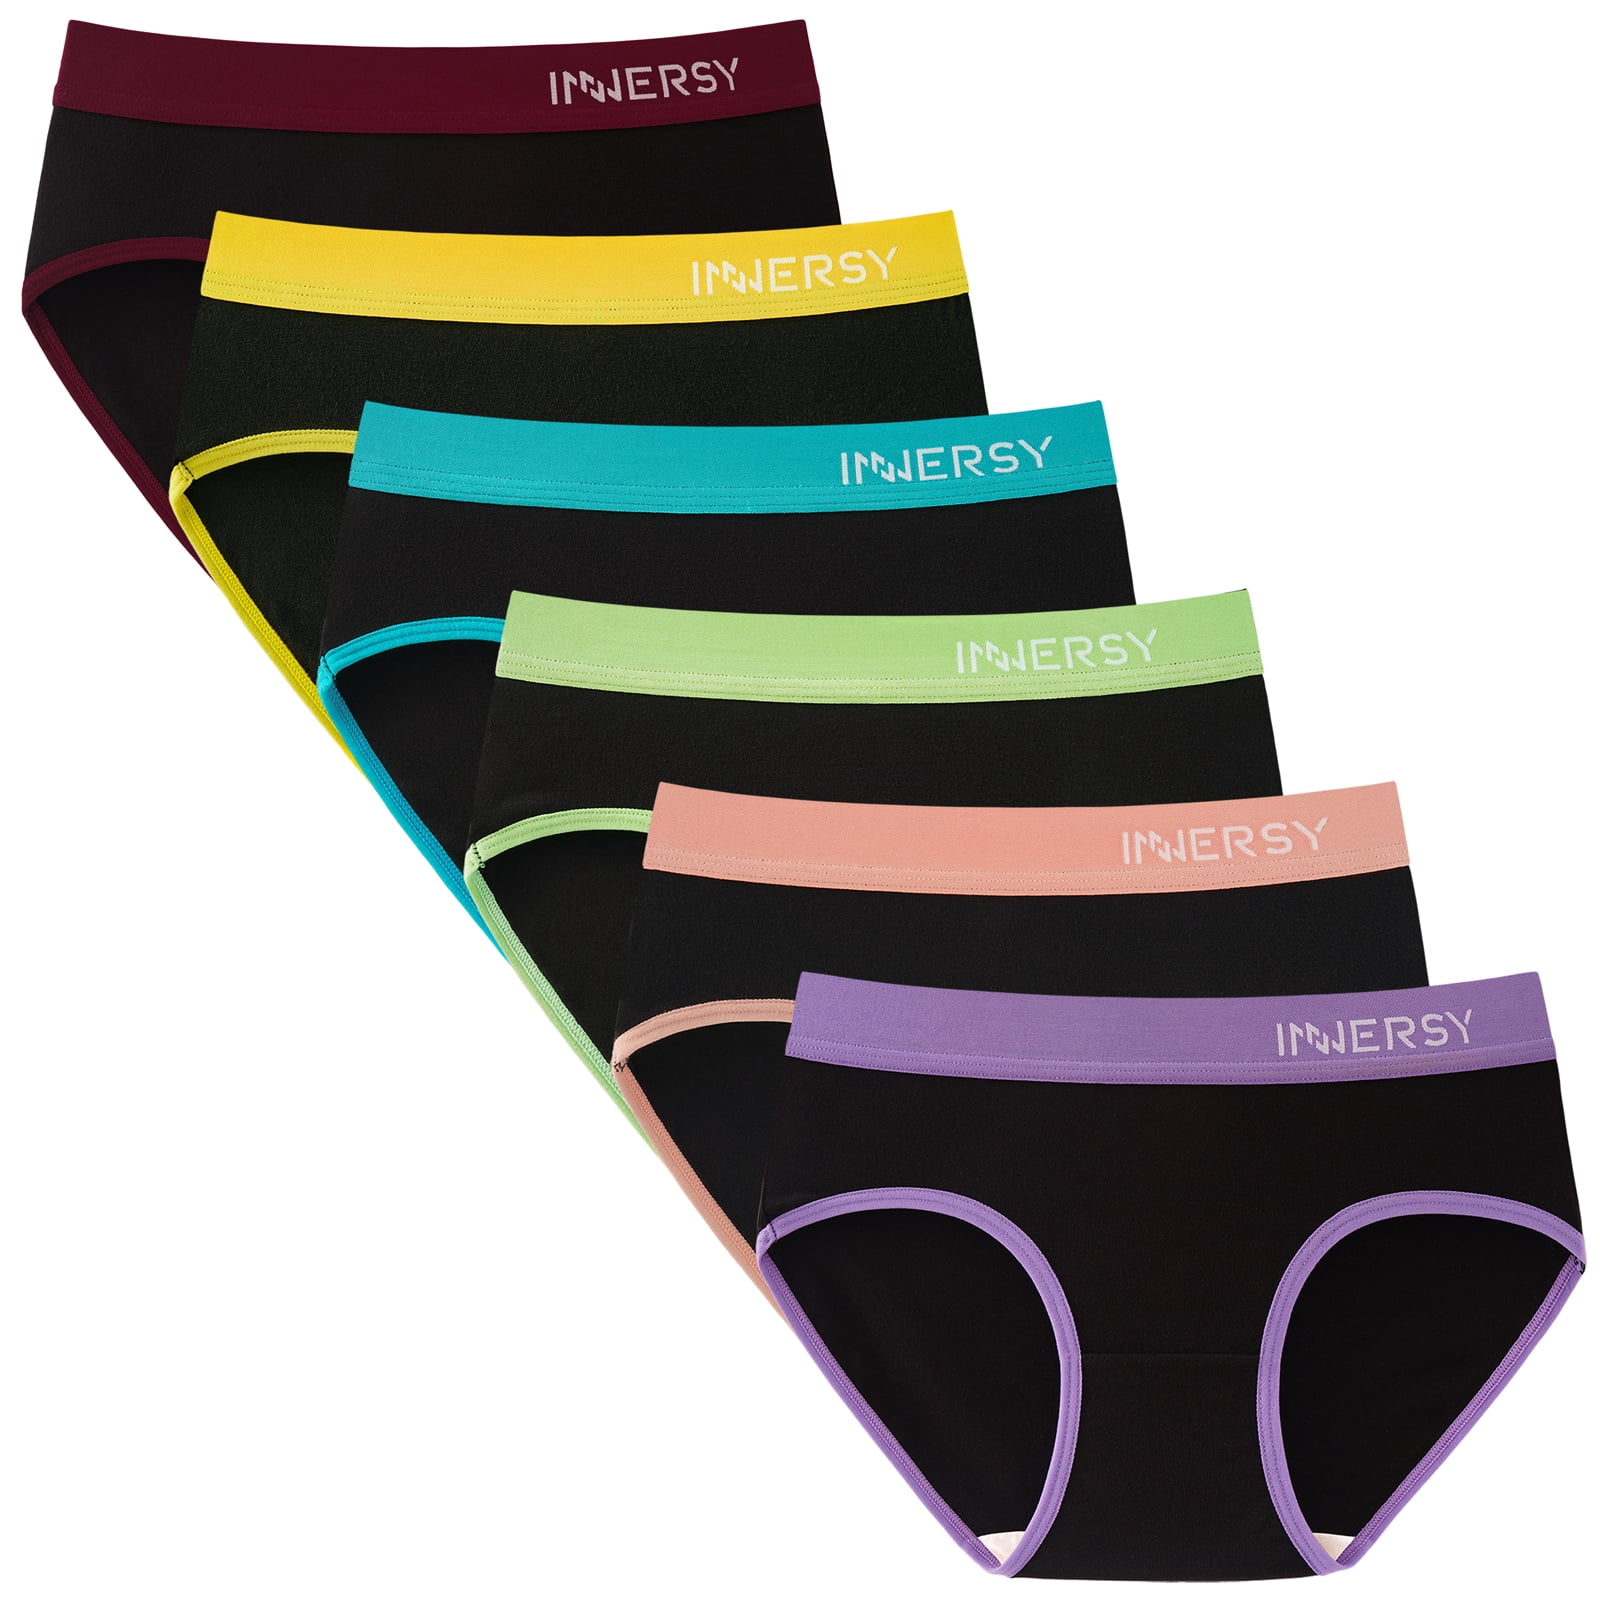 INNERSY Big Girls' Underwear Cotton Full Briefs Contrasting Color